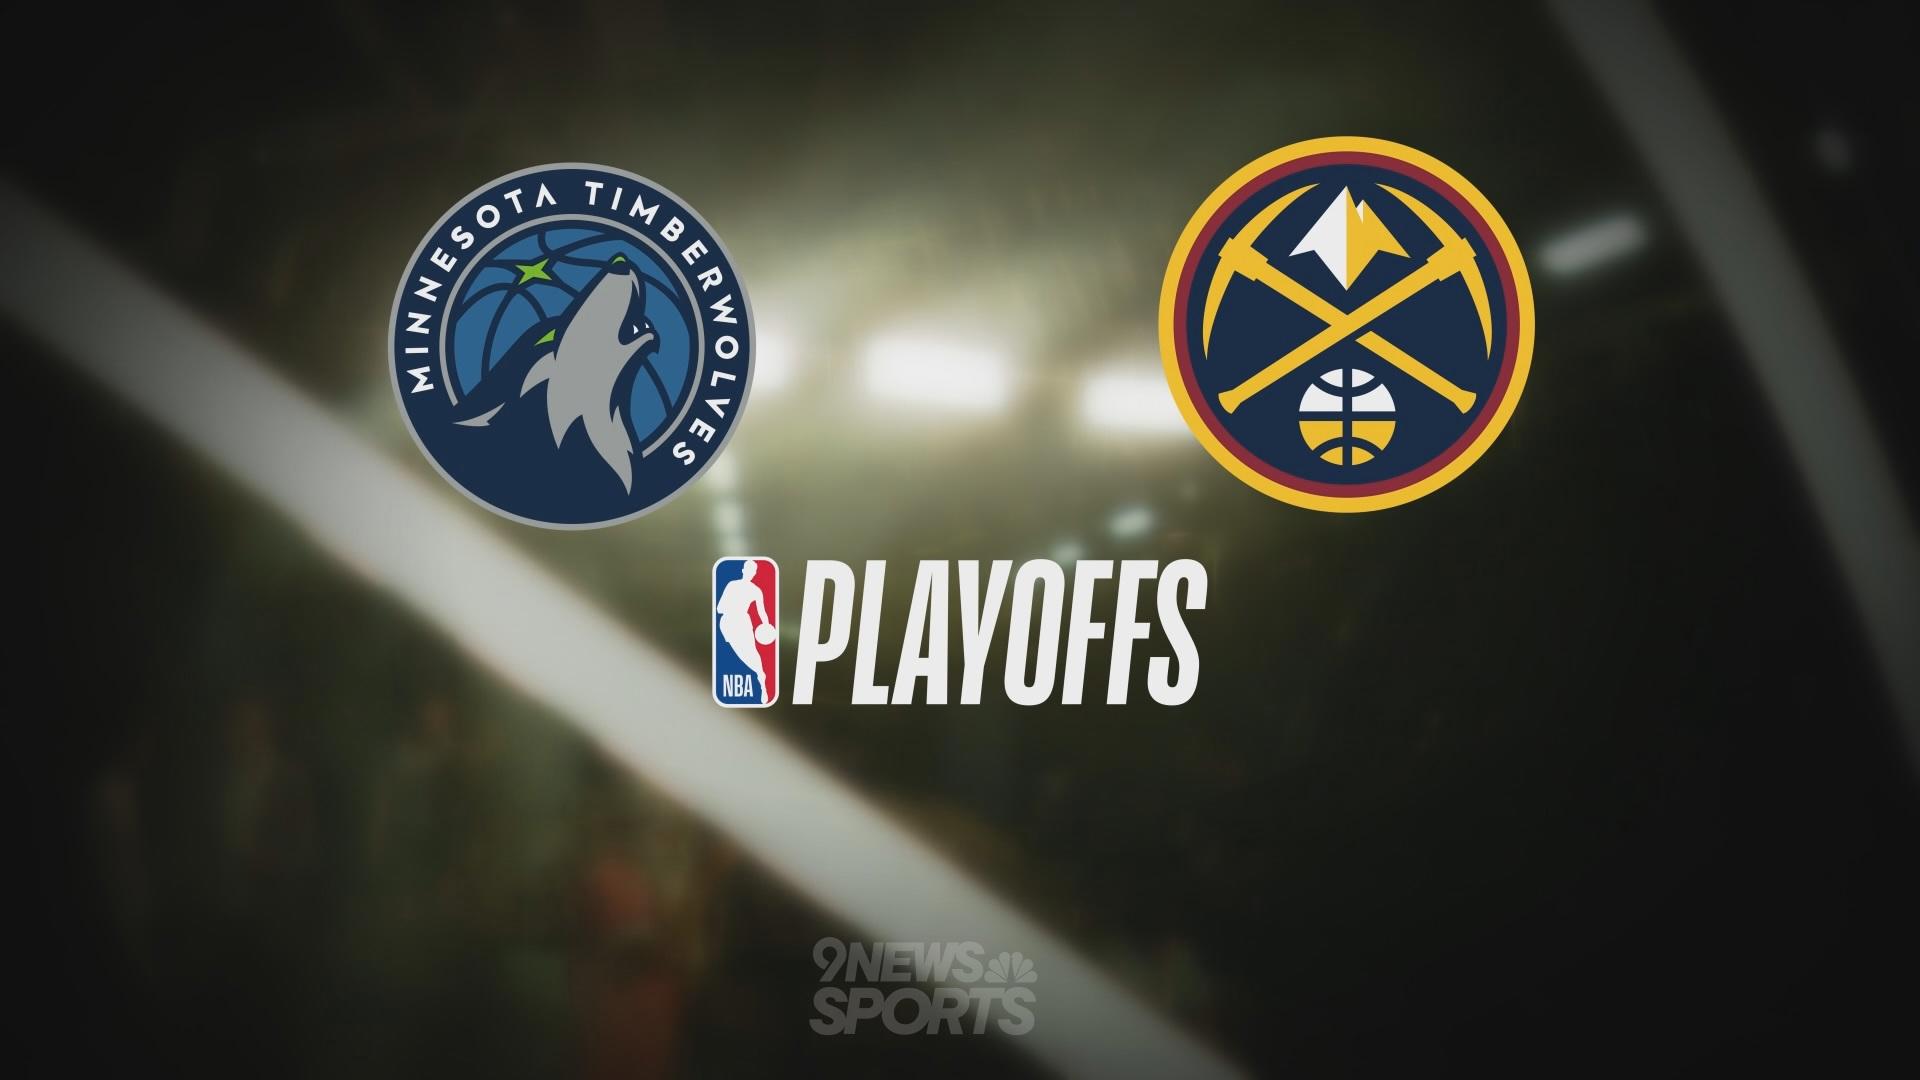 The Denver Nuggets and Minnesota Timberwolves open their second-round NBA playoff series Saturday at Ball Arena.